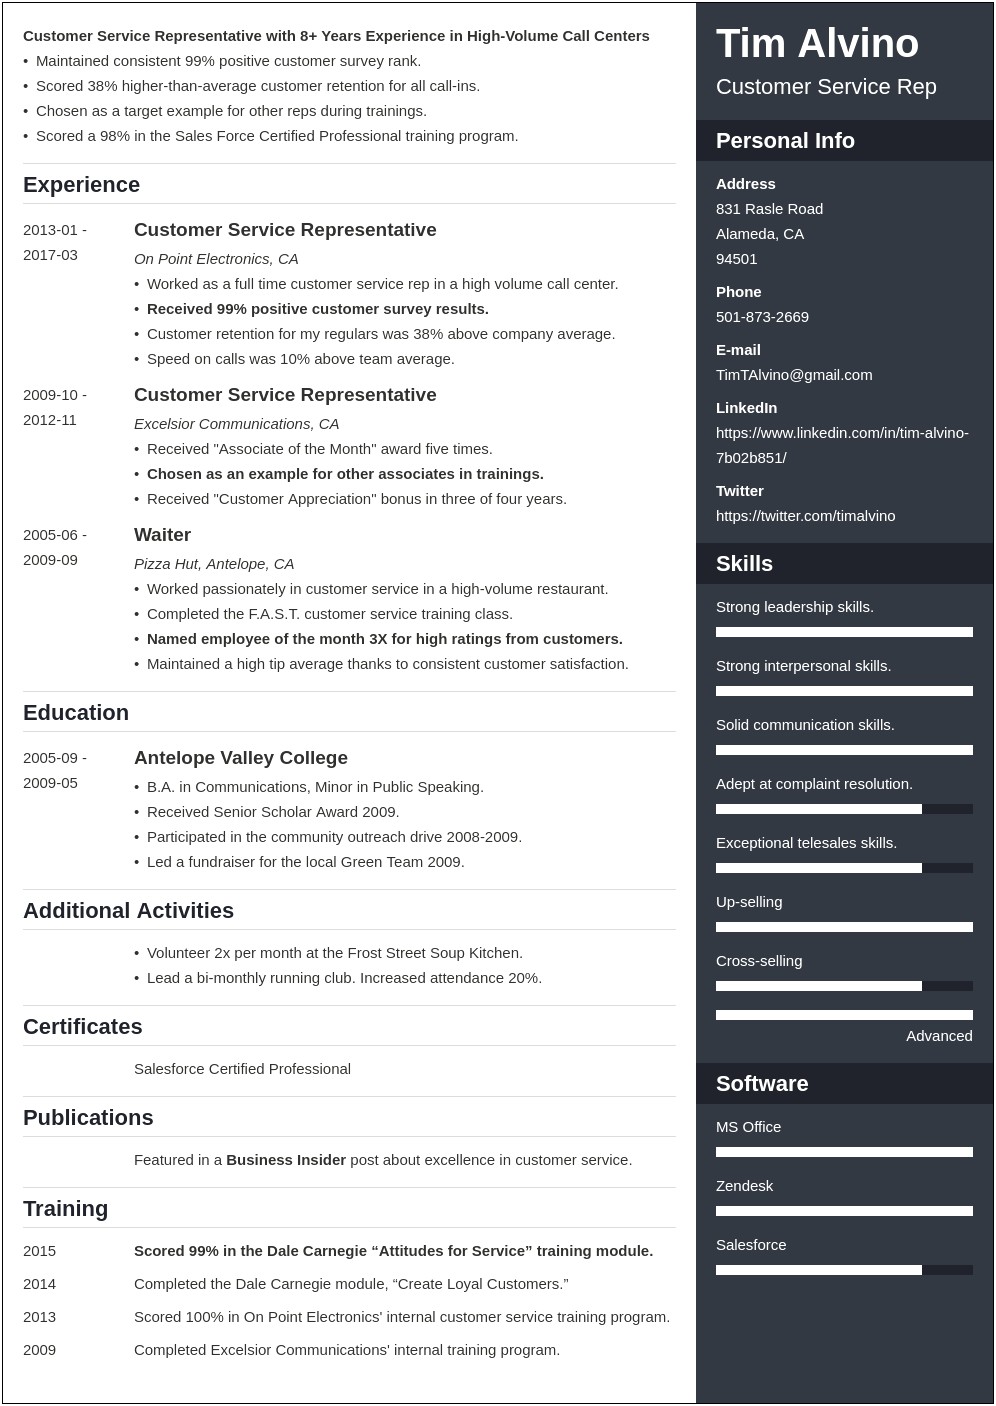 Tagline Examples For A Resume